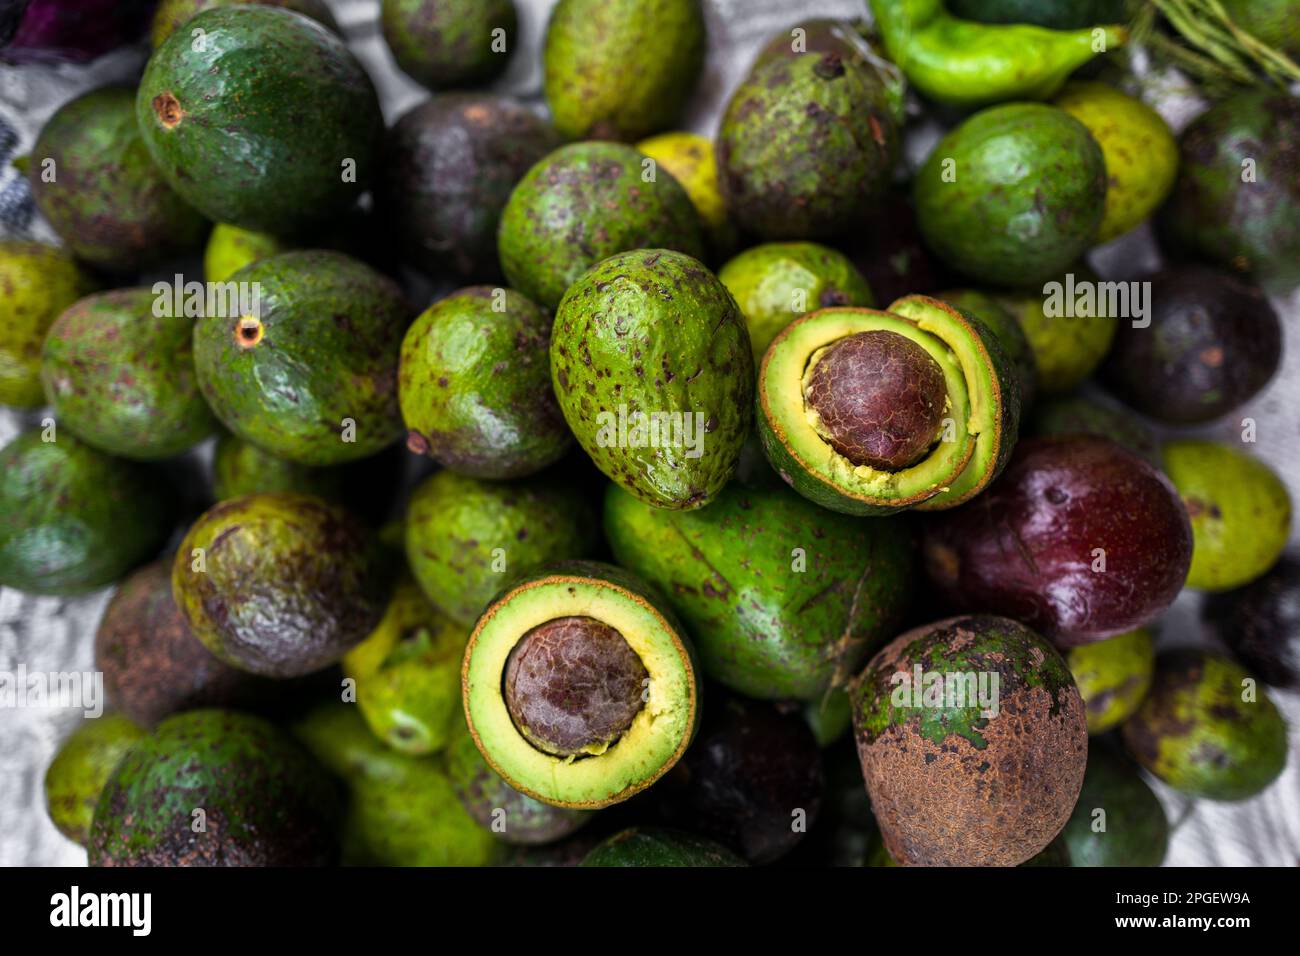 Fresh and ripe avocados are seen piled on the market stand for sale in the street market in Cali, Colombia. Stock Photo